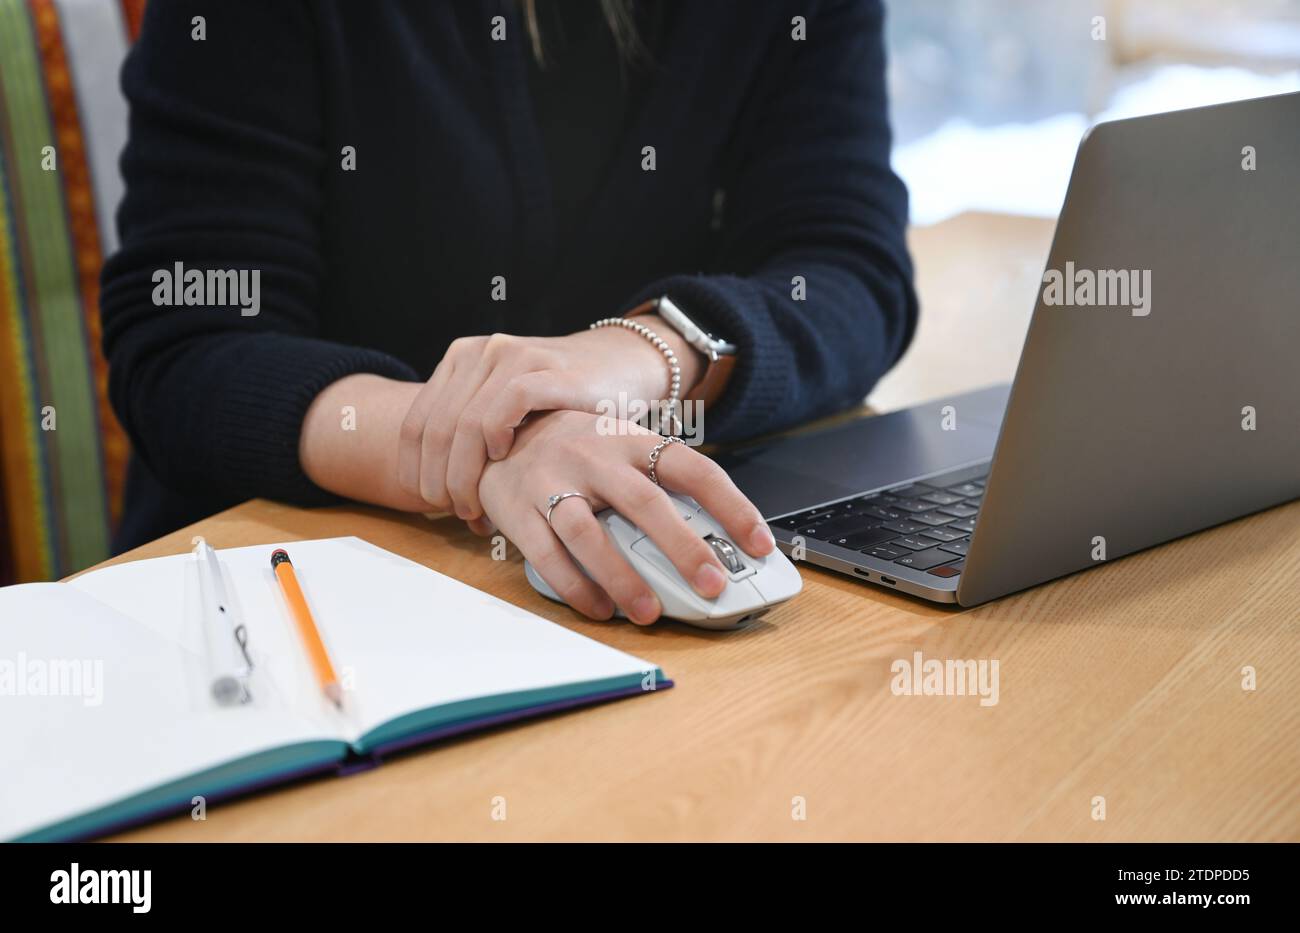 A woman working at a desk using a laptop and mouse is complaining of ...